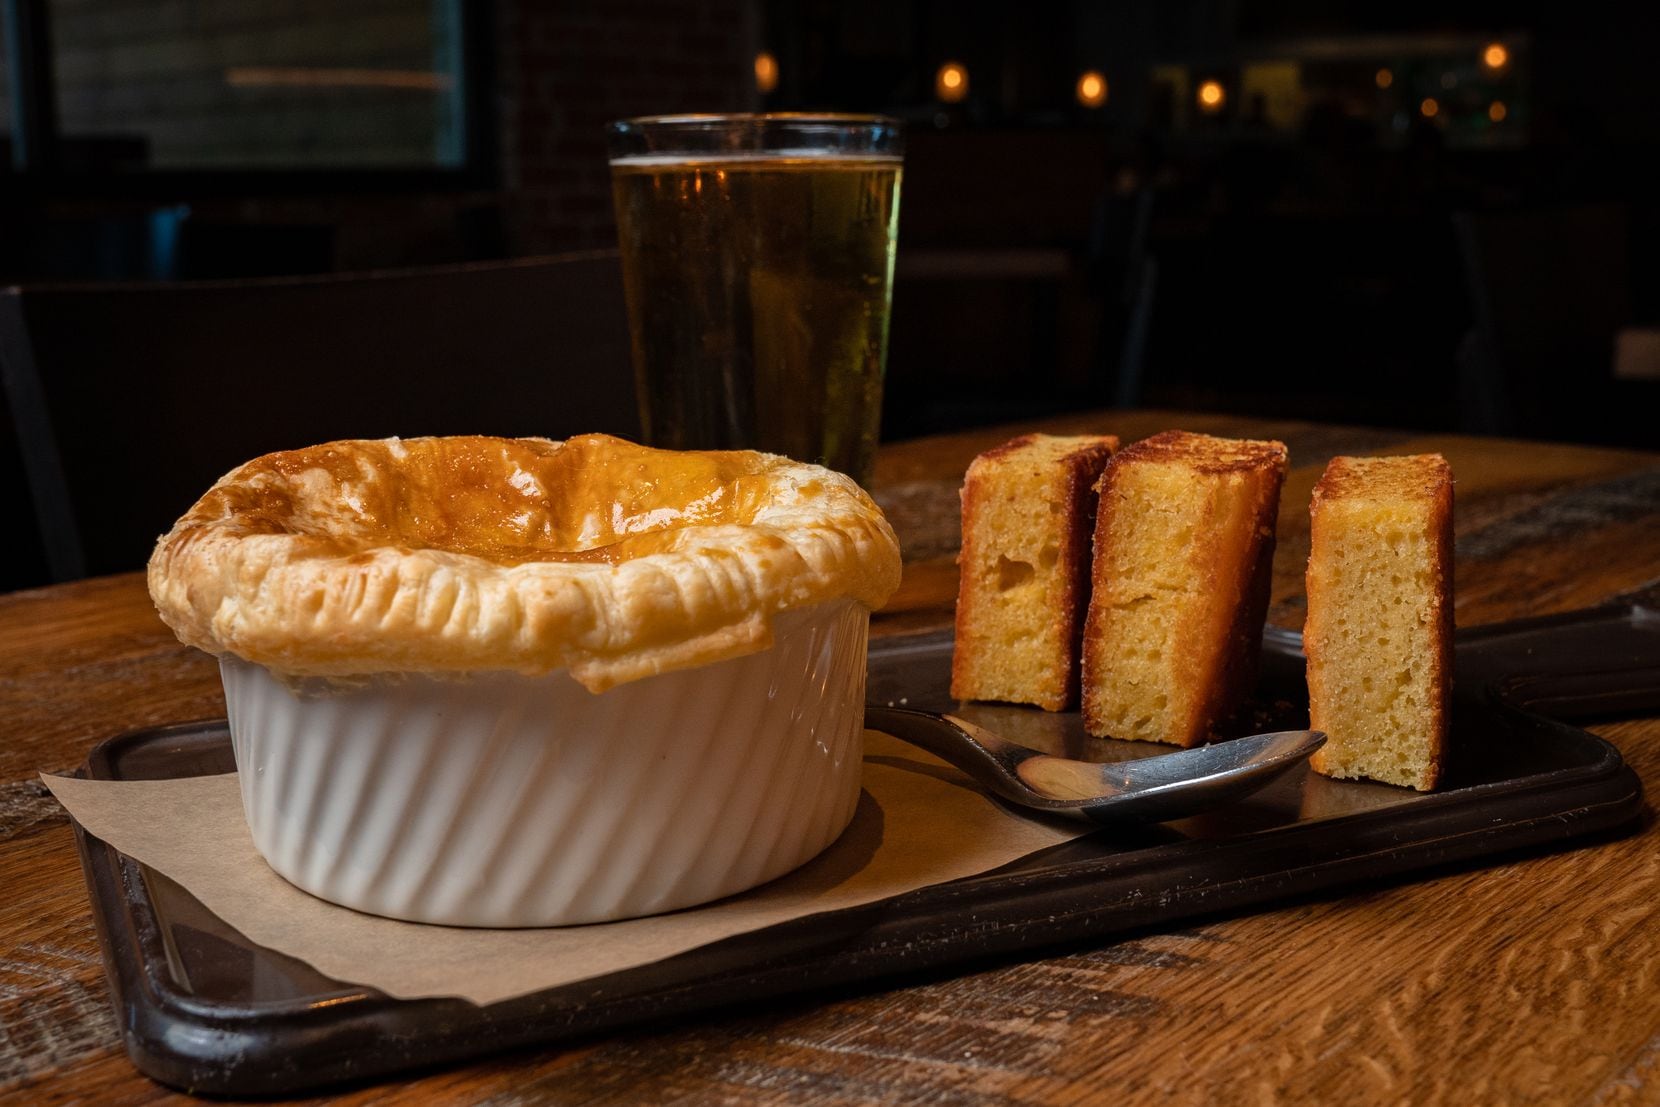 Among Sugarbacon Proper Kitchen's comfort food items include the Crawfish Pot Pie, which features a creamy dill sauce and cornbread.